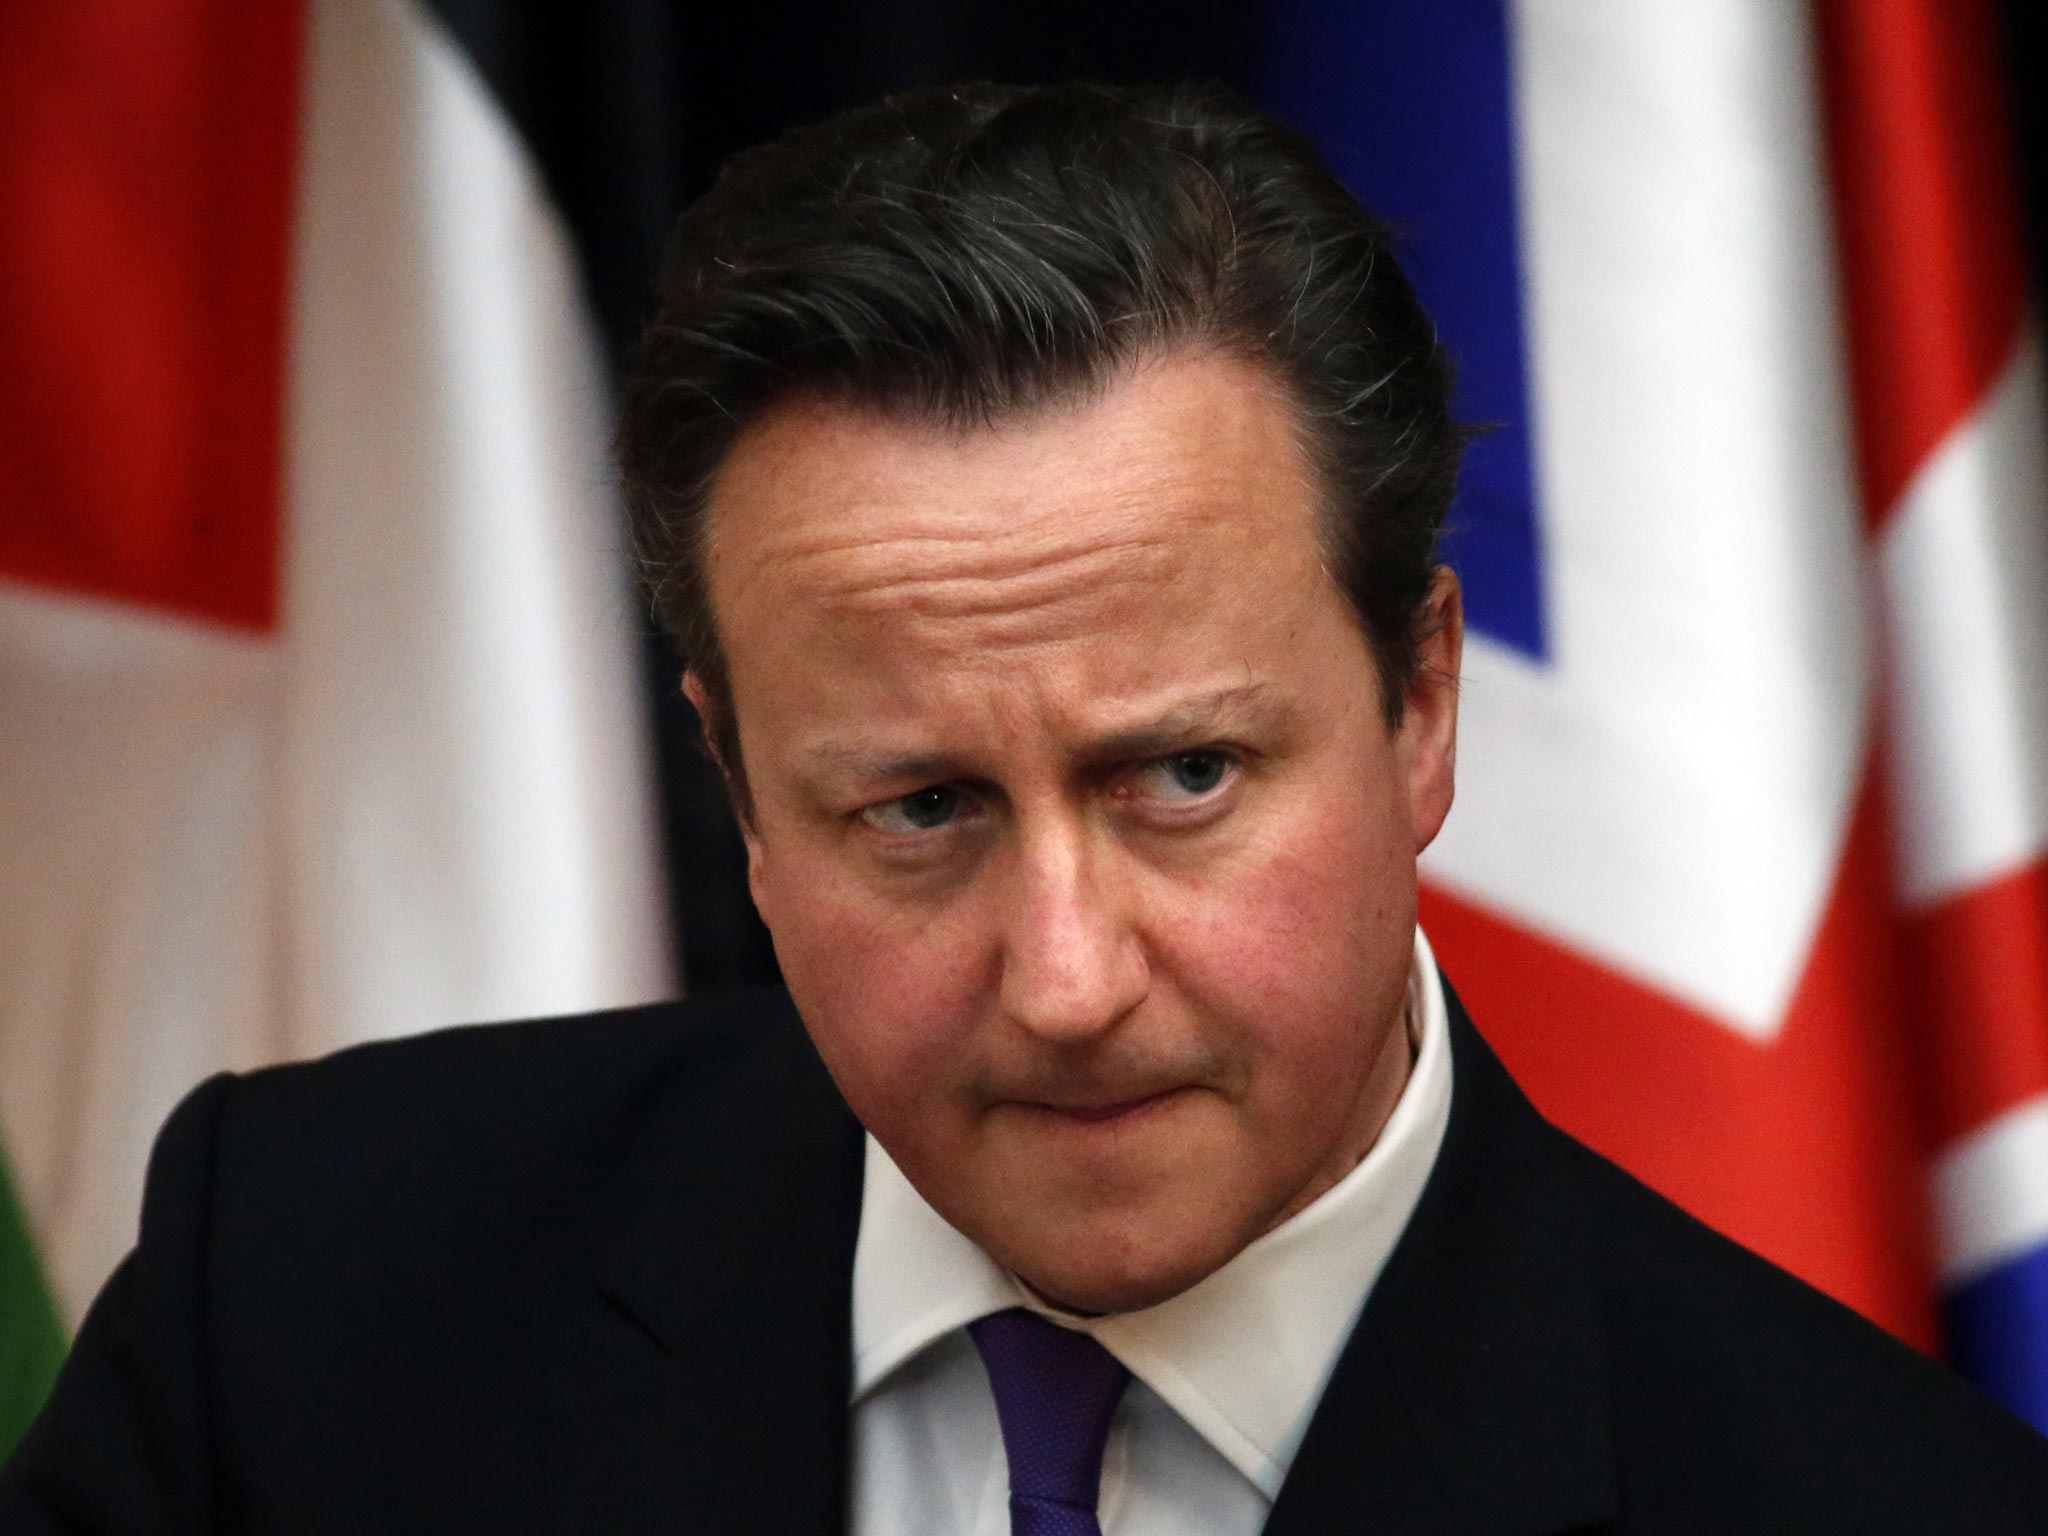 David Cameron says the country needs to be "more muscular" in promoting British values